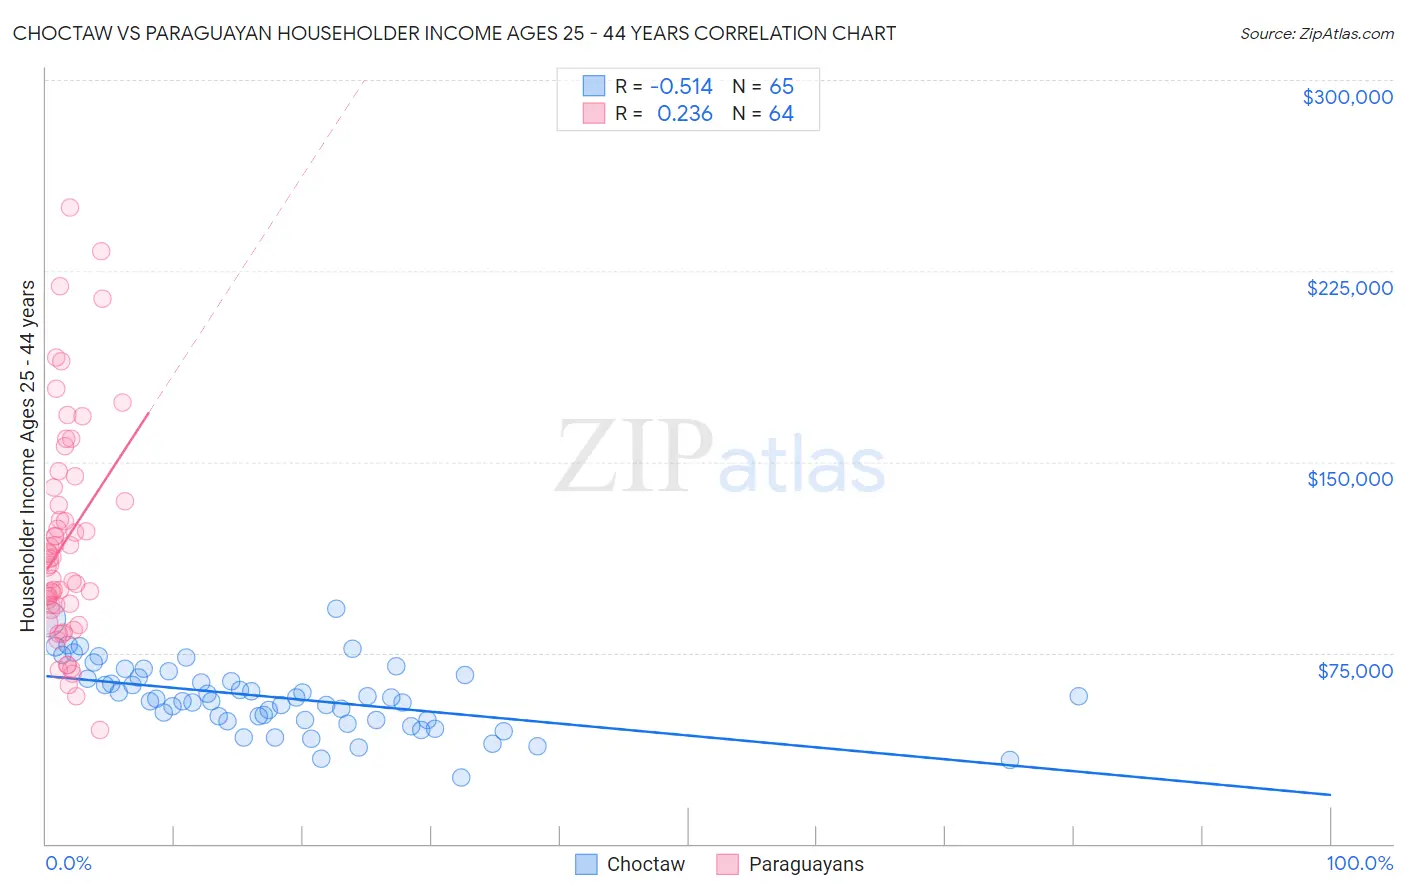 Choctaw vs Paraguayan Householder Income Ages 25 - 44 years